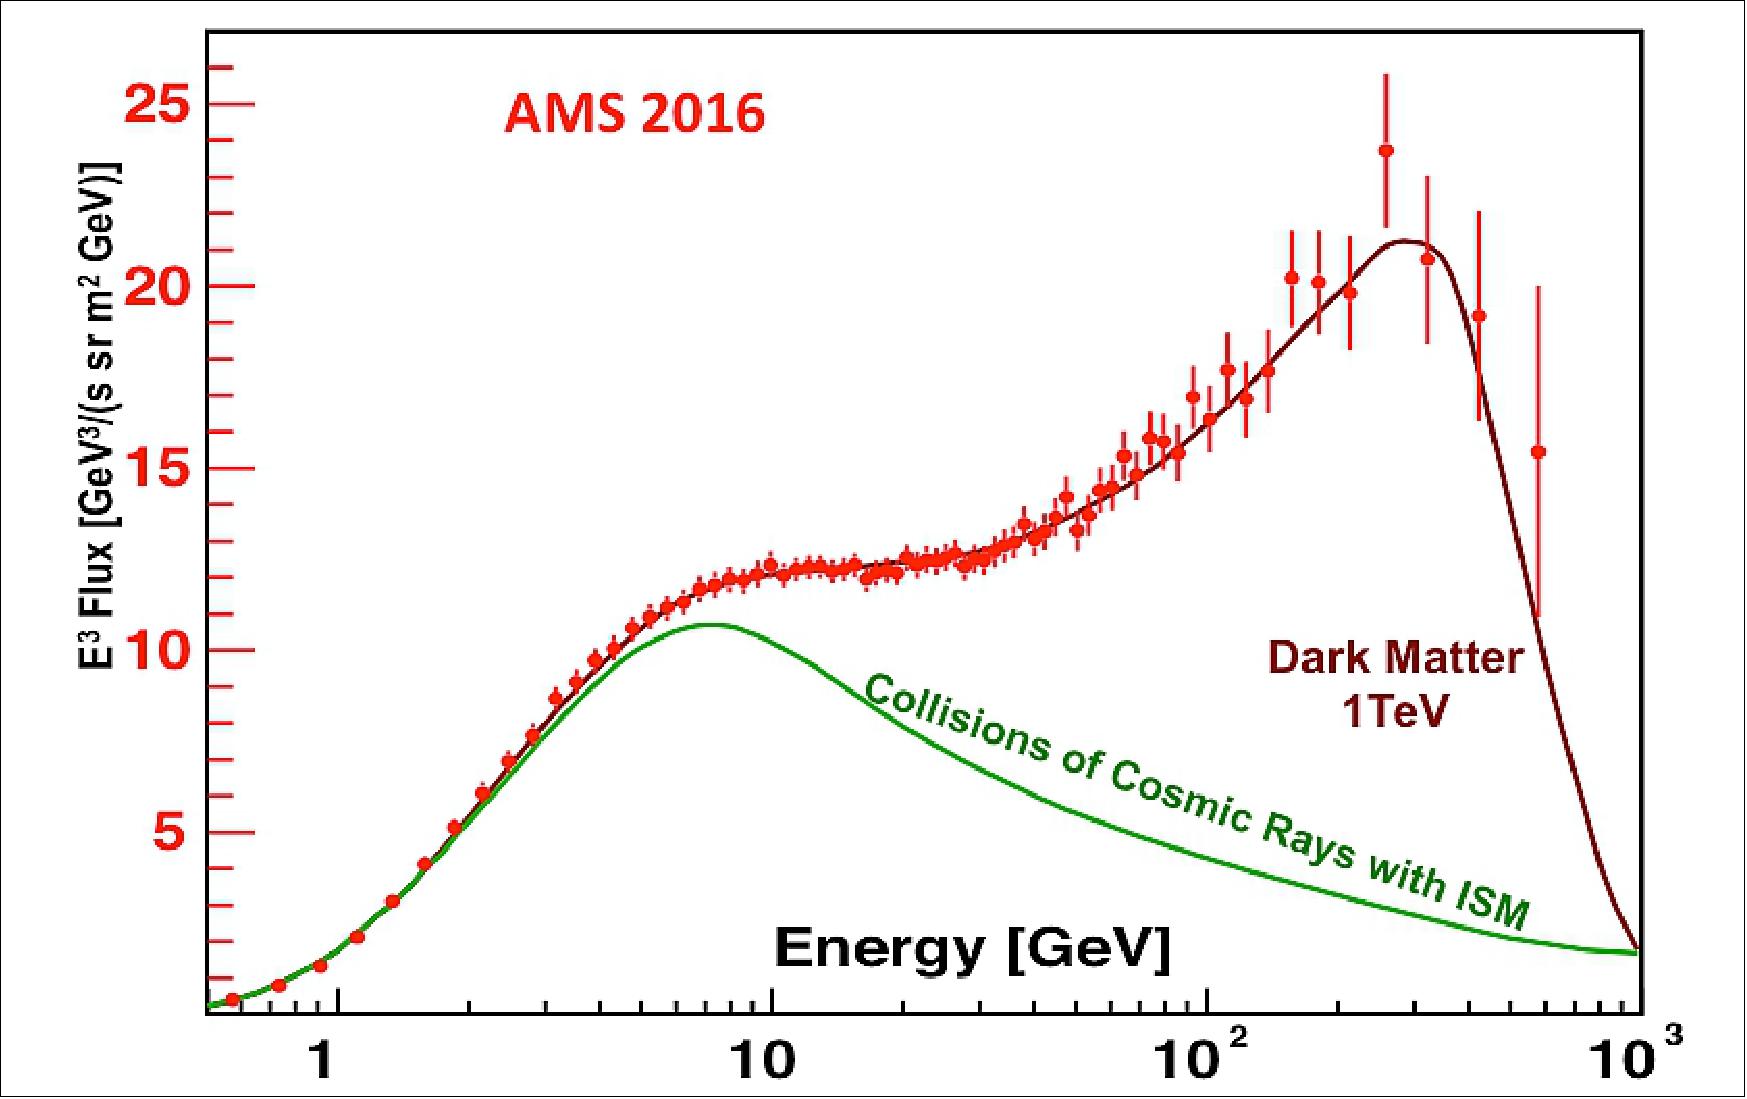 Figure 14: The current AMS positron flux measurement compared with theoretical models (image credit: AMS Collaboration)